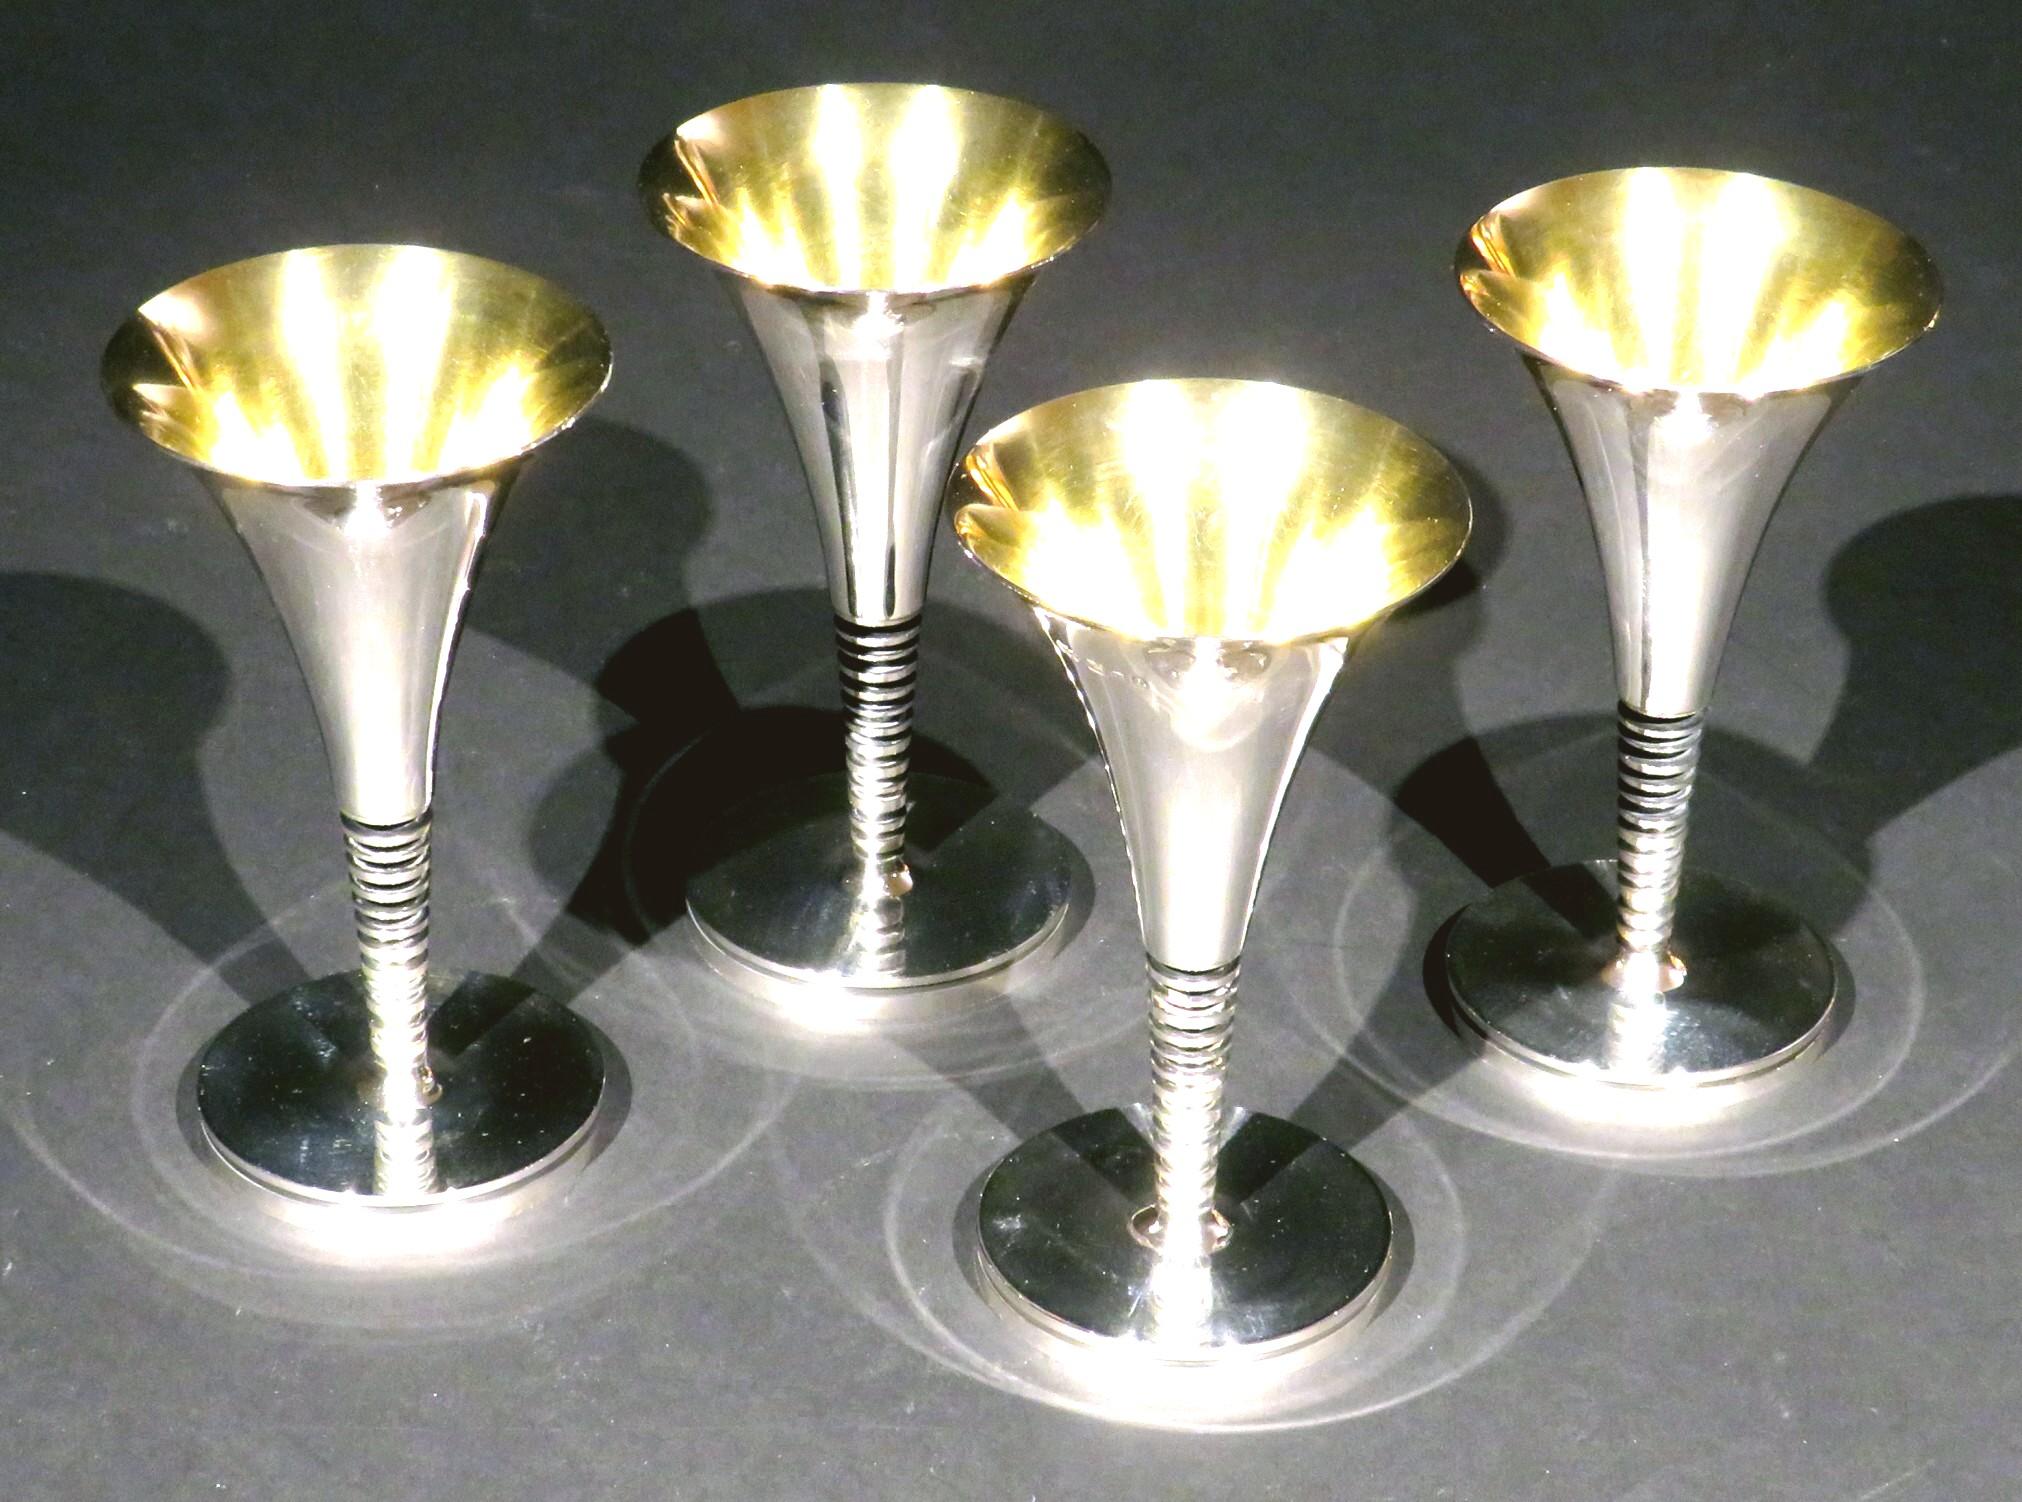 A truly rare & unique set of four stunningly handsome Post Modern sterling silver champagne flutes, specifically designed & made on commission by highly acclaimed British designer & silversmith Robert May. 
One pair was privately commissioned to